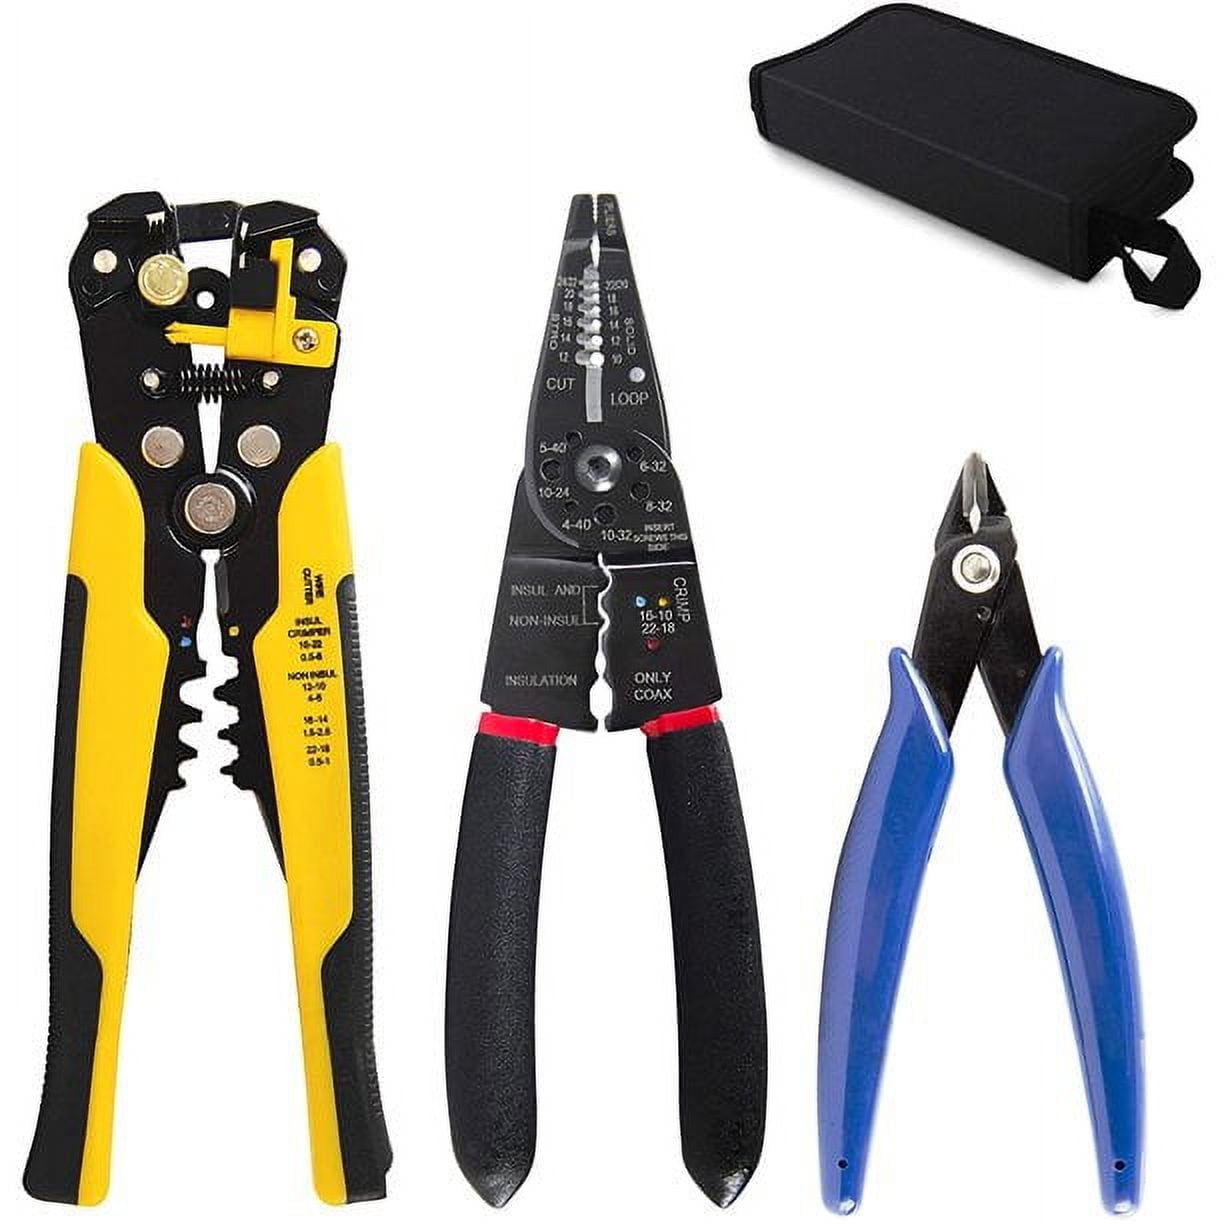 IDEAL Electrical 30-430 Standard Side-Cutting Pliers - 9.5 In., Linesman  Pliers With Nose, Crimping Die, Fish Tape Puller, PVC Grip Handles 